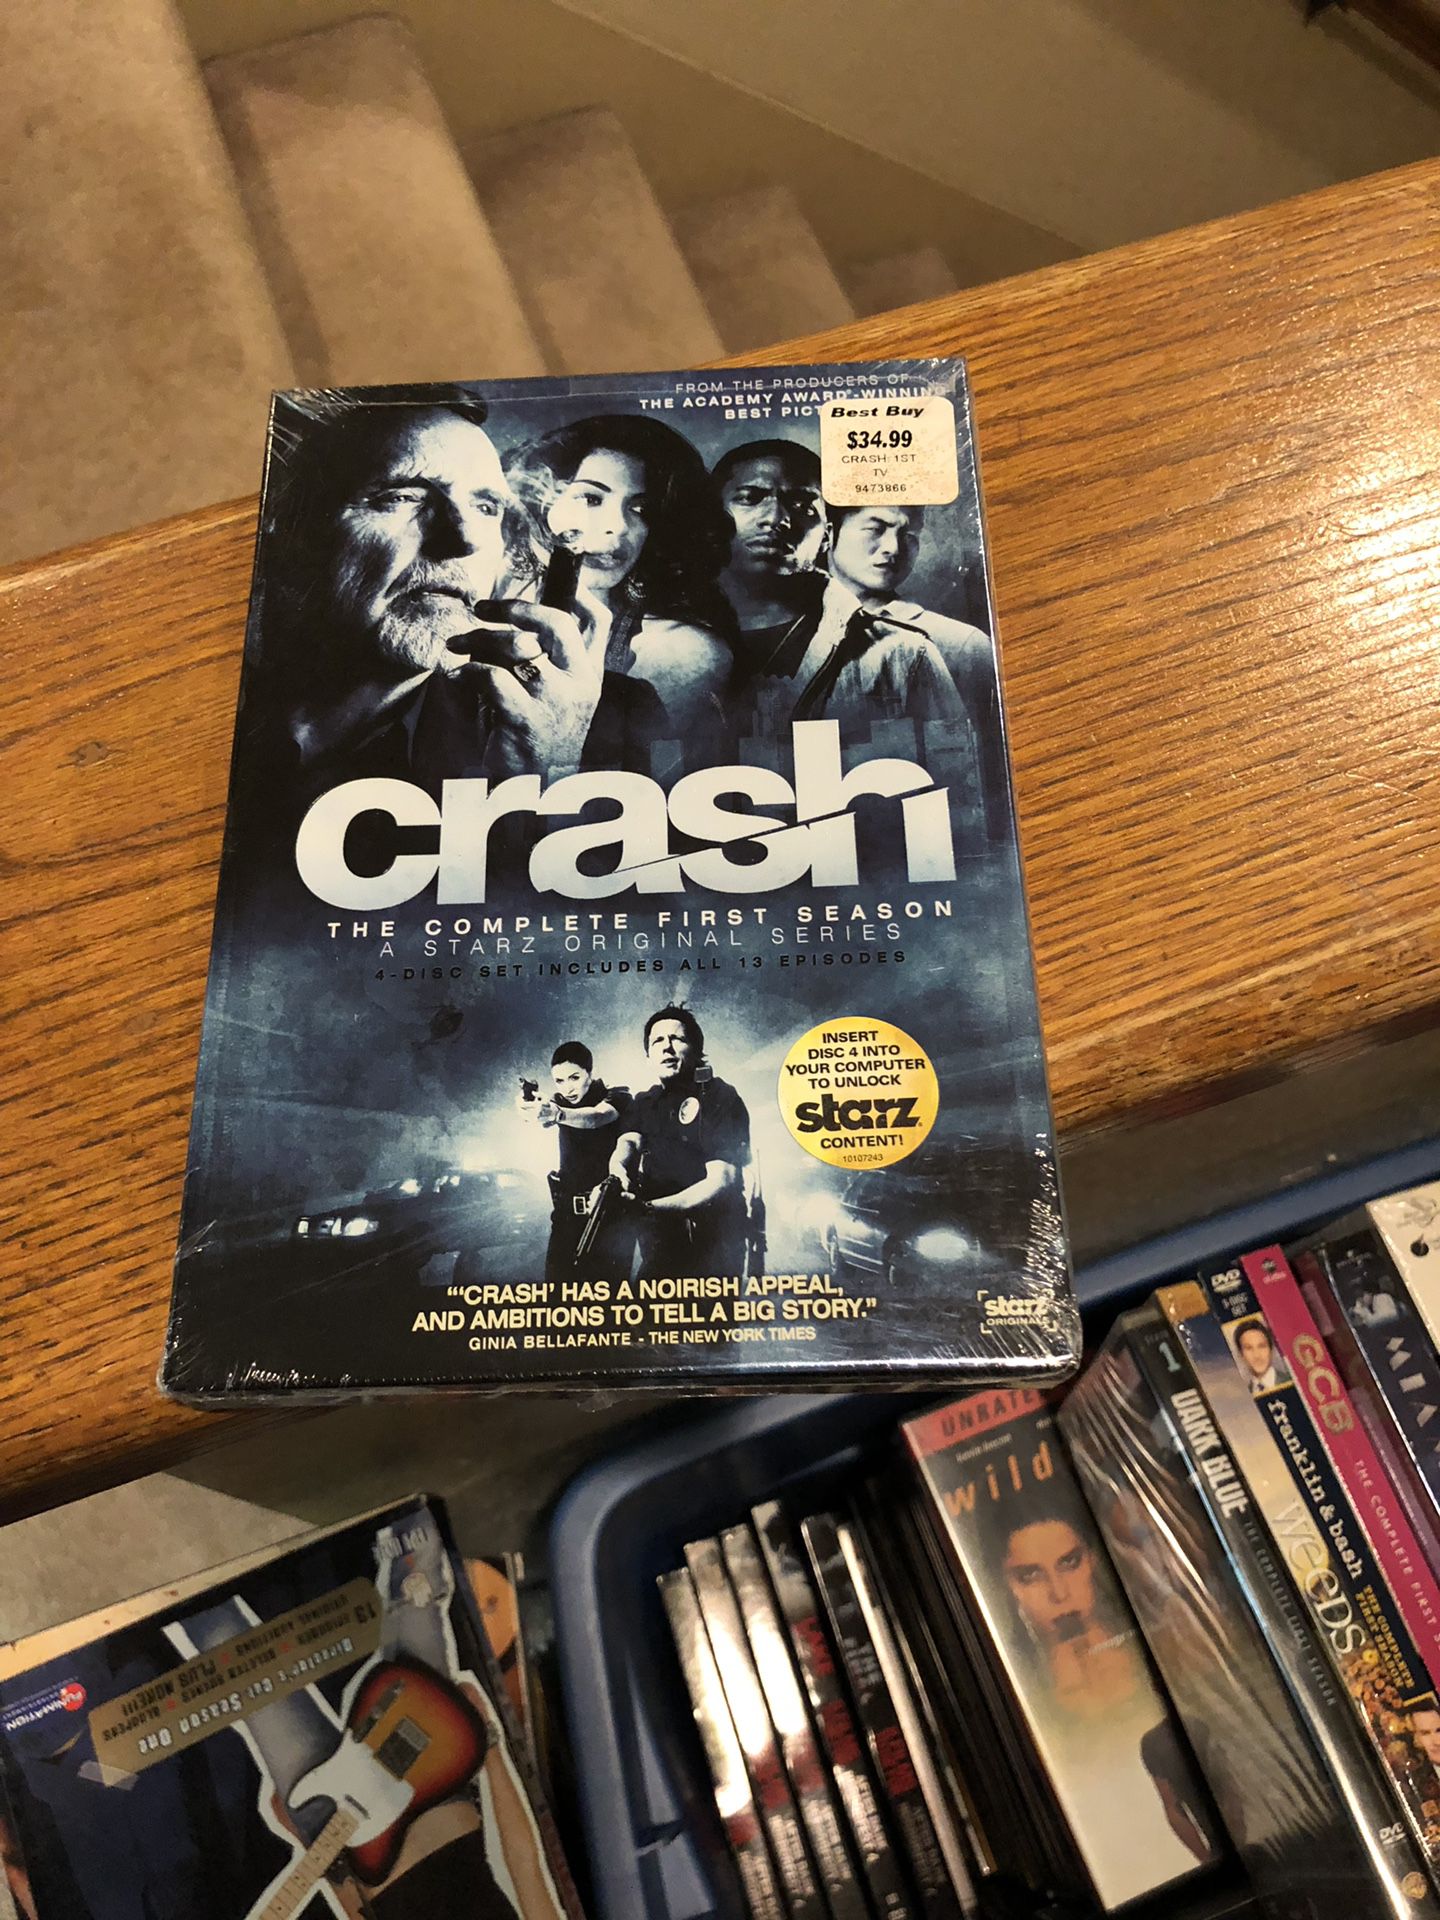 Crash The Complete First Season DVD Brand New Factory Sealed one 1 tv series s1 starz